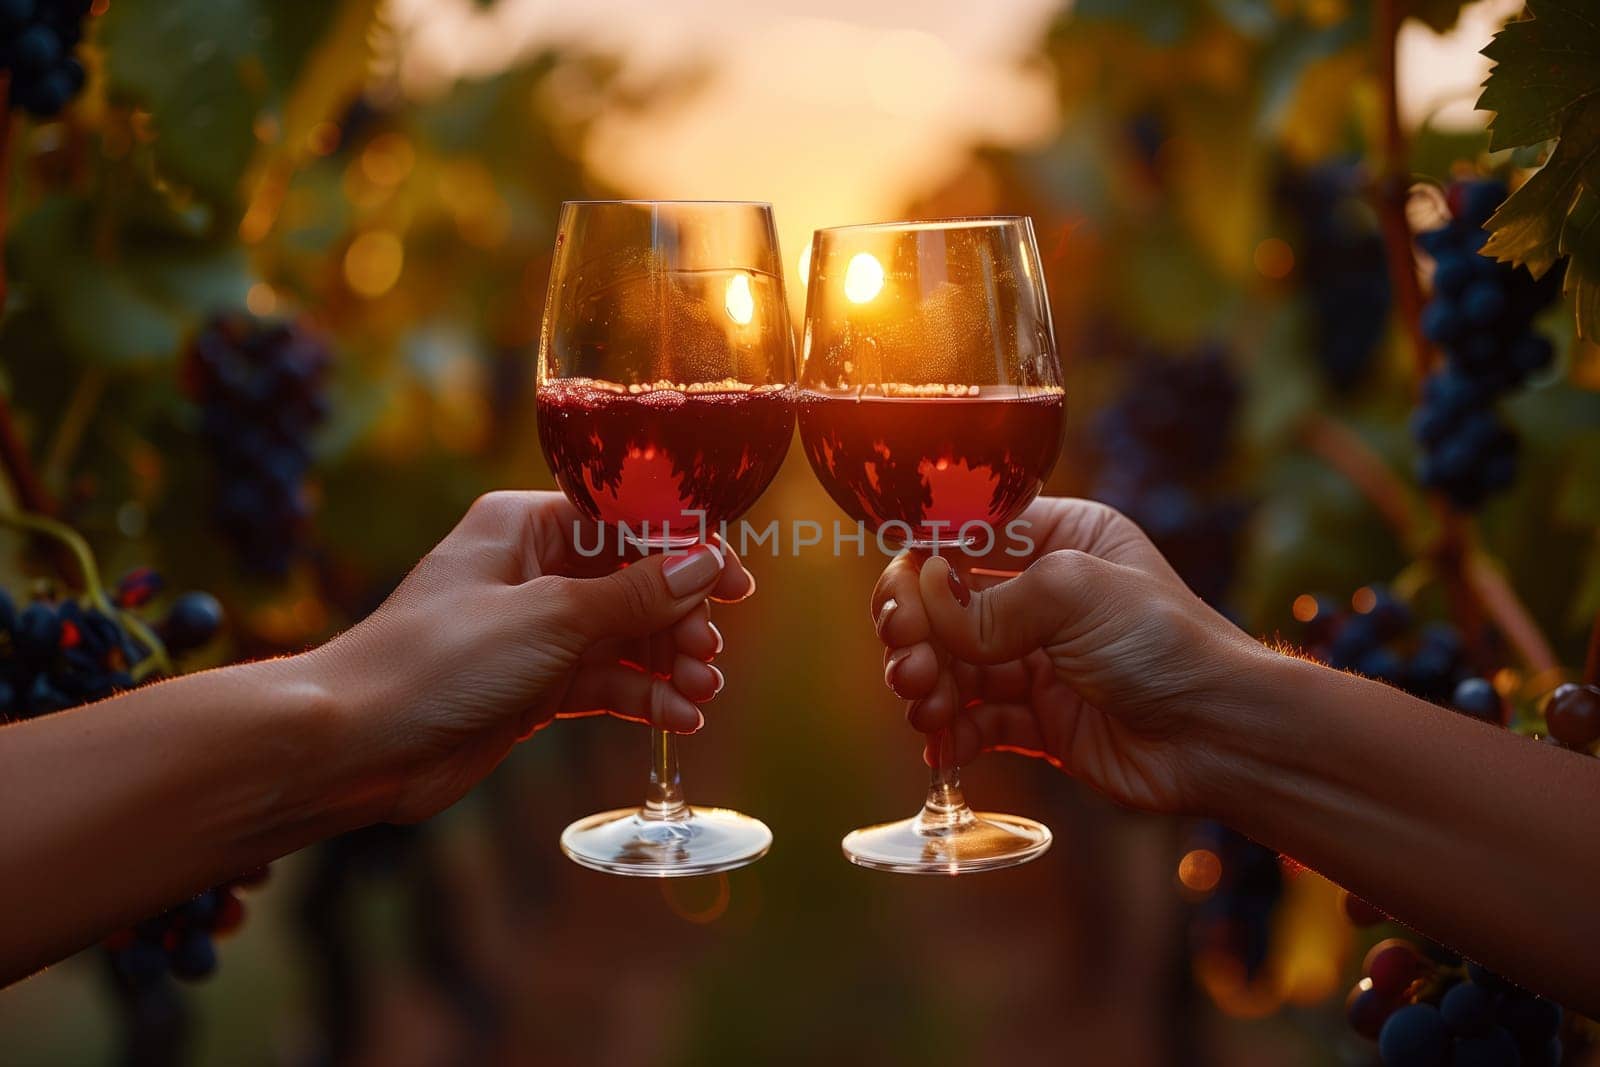 Two people making a toast with wine glasses in a vineyard by richwolf